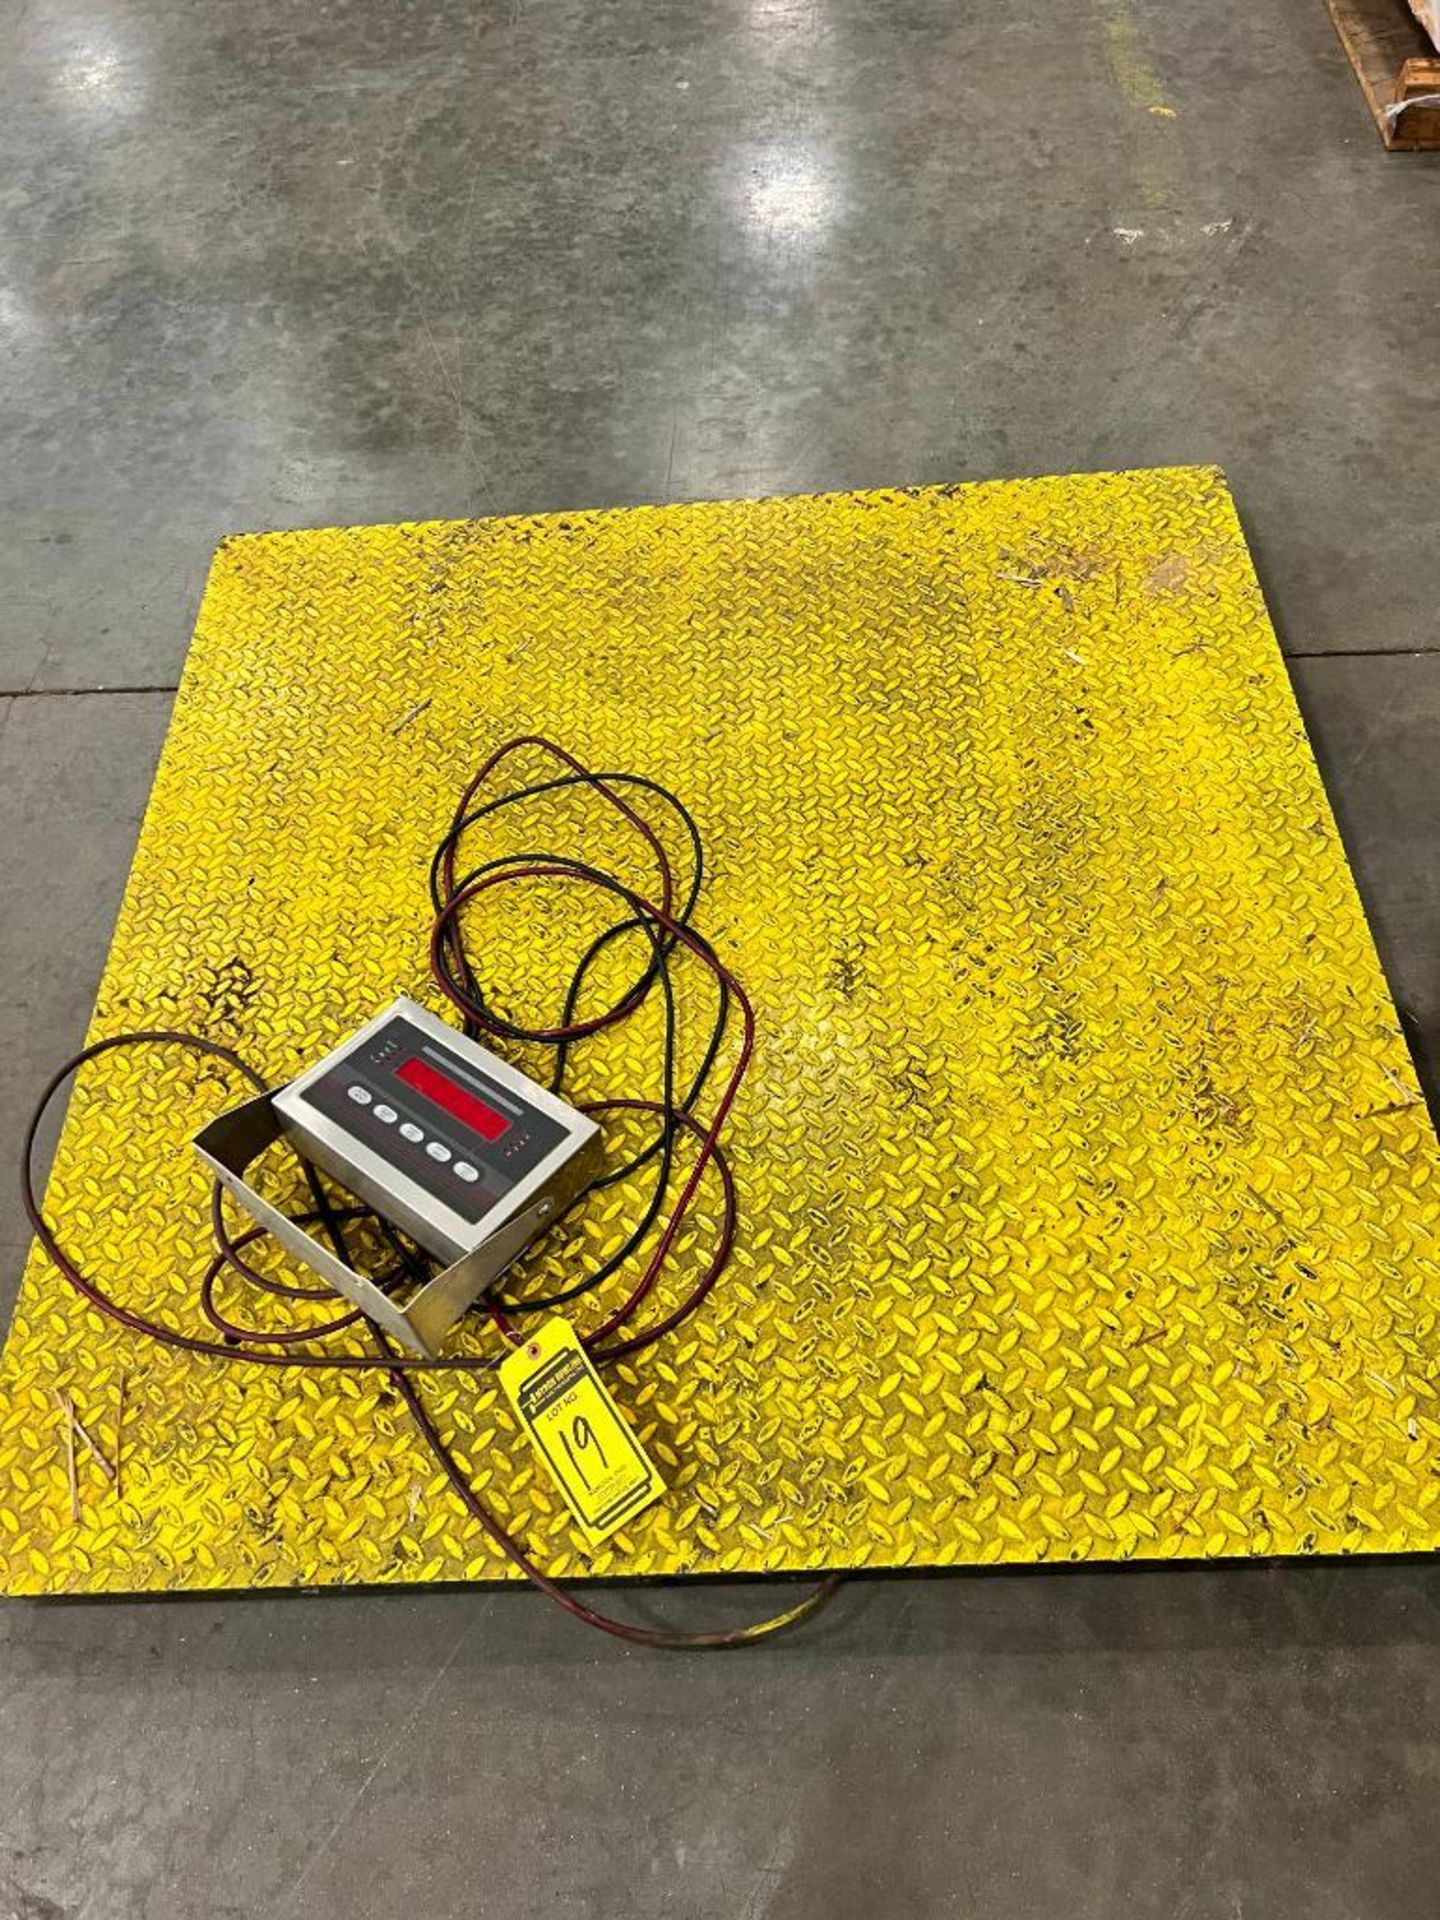 Floor Scale w/ Rice Lake Weighing Digital Readout ($15 Loading fee will be added to buyers invoice)